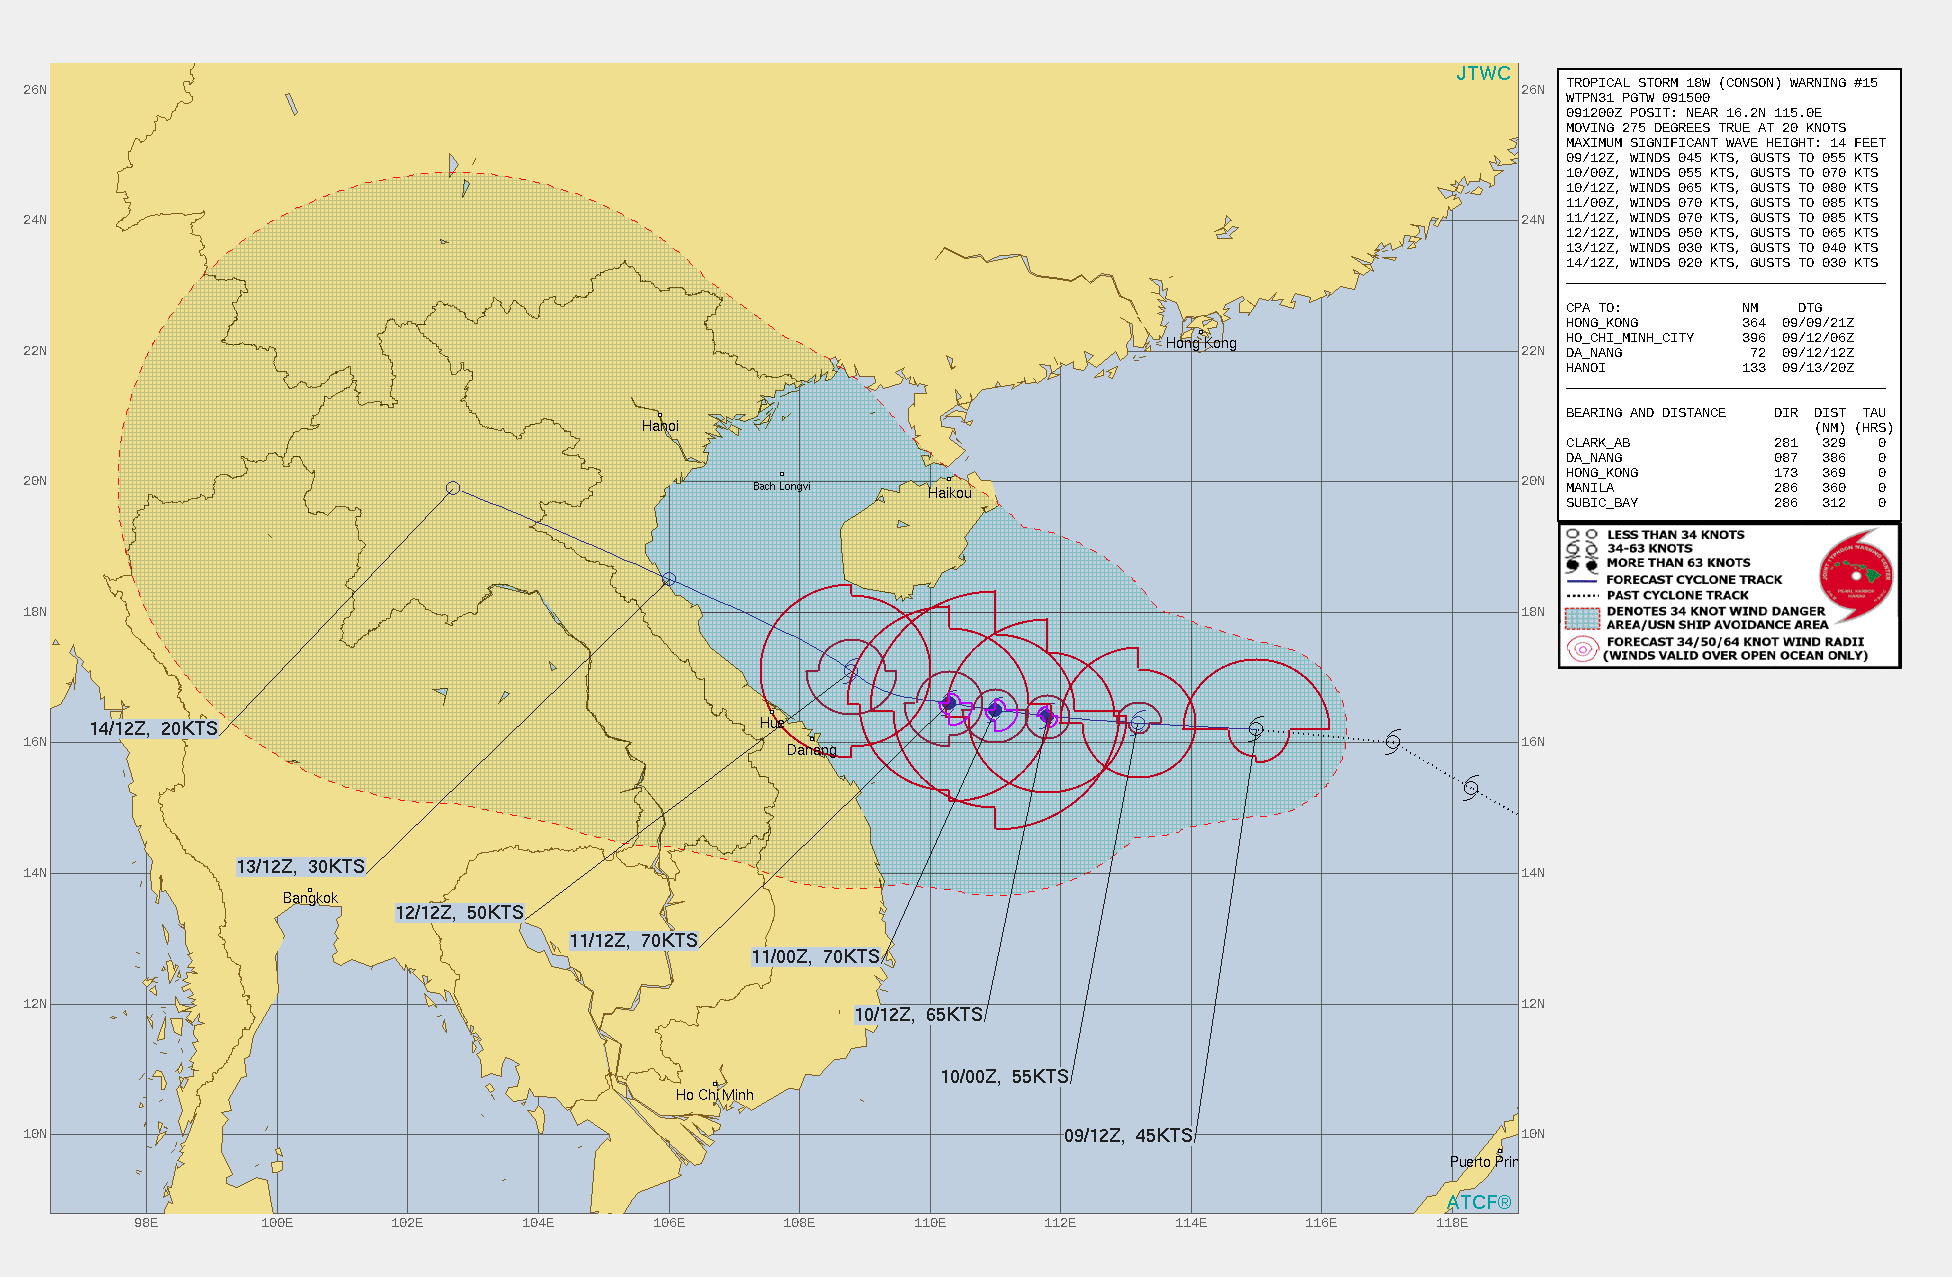 TS 18W(CONSON). WARNING 15 ISSUED AT 09/15UTC.SIGNIFICANT FORECAST CHANGES: THERE ARE NO SIGNIFICANT CHANGES TO THE FORECAST FROM THE PREVIOUS WARNING.  FORECAST DISCUSSION: TROPICAL STORM (TS) 18W IS CURRENTLY TRACKING WESTWARD UNDER THE INFLUENCE OF THE SUBTROPICAL RIDGE TO THE NORTHEAST. AROUND 48H, IT WILL TURN MORE WEST-NORTHWESTWARD AS A MID-LATITUDE TROUGH BEGINS TO DEEPEN TO THE NORTH, CREATING A WEAK  STEERING ENVIRONMENT. THE SYSTEM IS EXPECTED TO MAKE LANDFALL OVER  NORTHERN VIETNAM ROUGHLY 185 KM SOUTH OF HANOI. THE MARGINALLY  FAVORABLE ENVIRONMENT WILL ALLOW SLIGHT INTENSIFICATION TO A PEAK OF  70 KNOTS/CAT 1 AROUND 48H. AFTERWARD, INCREASING VERTICAL WIND SHEAR AND  LAND INTERACTION WITH THE COAST OF VIETNAM WILL WEAKEN THE SYSTEM TO  30 KNOTS JUST BEFORE LANDFALL AT ABOUT 96H.